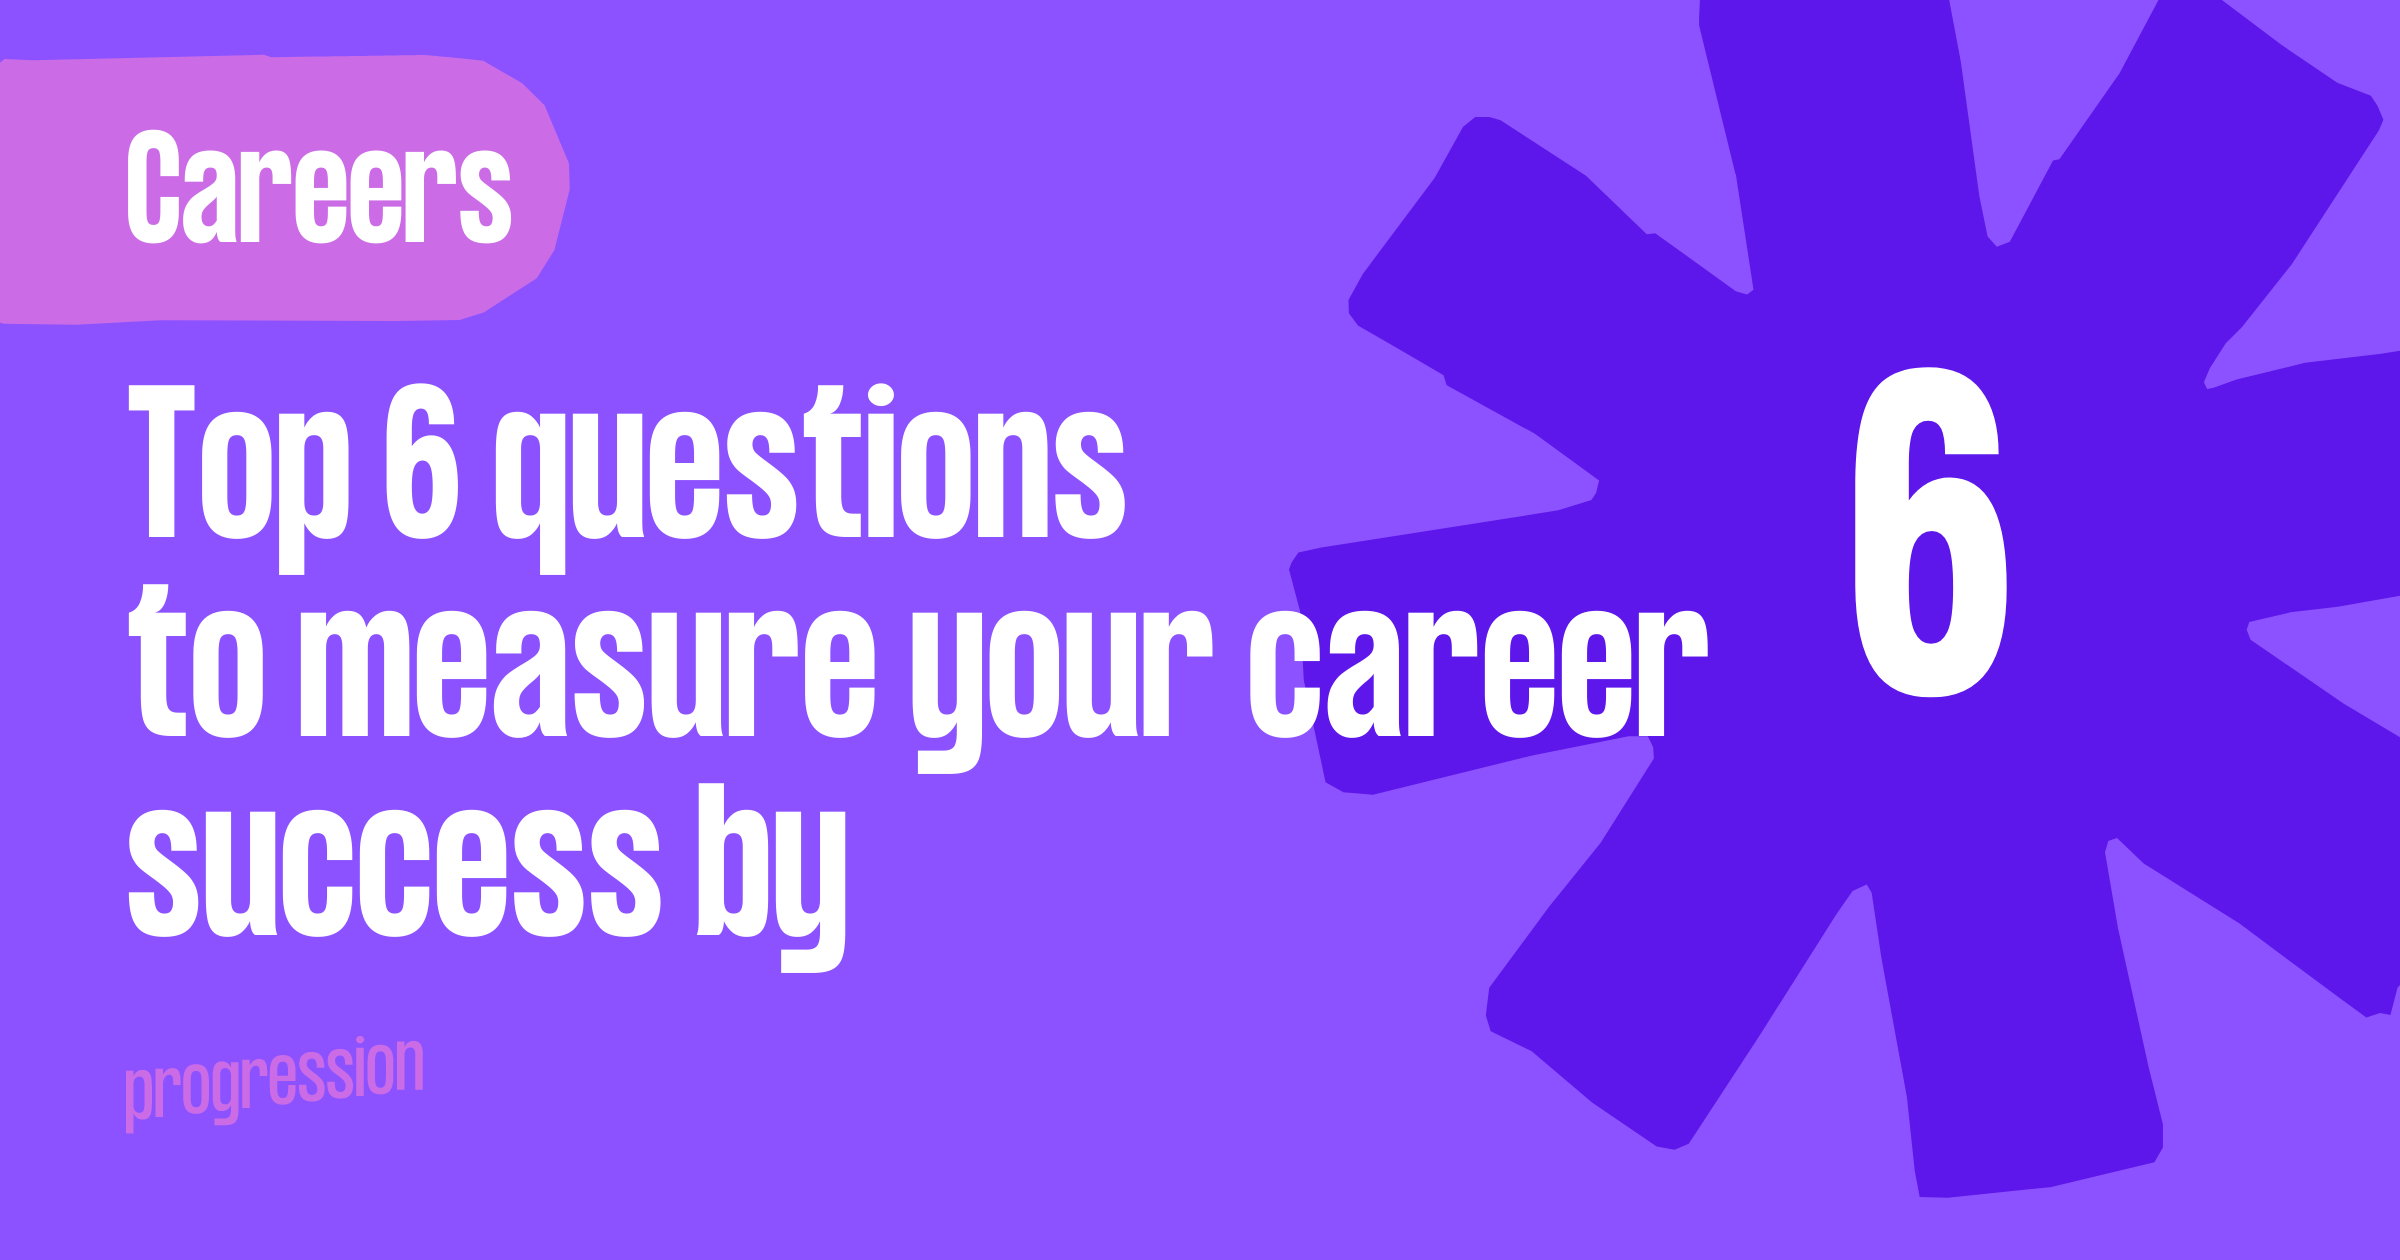 The top 6 questions to measure your career success by